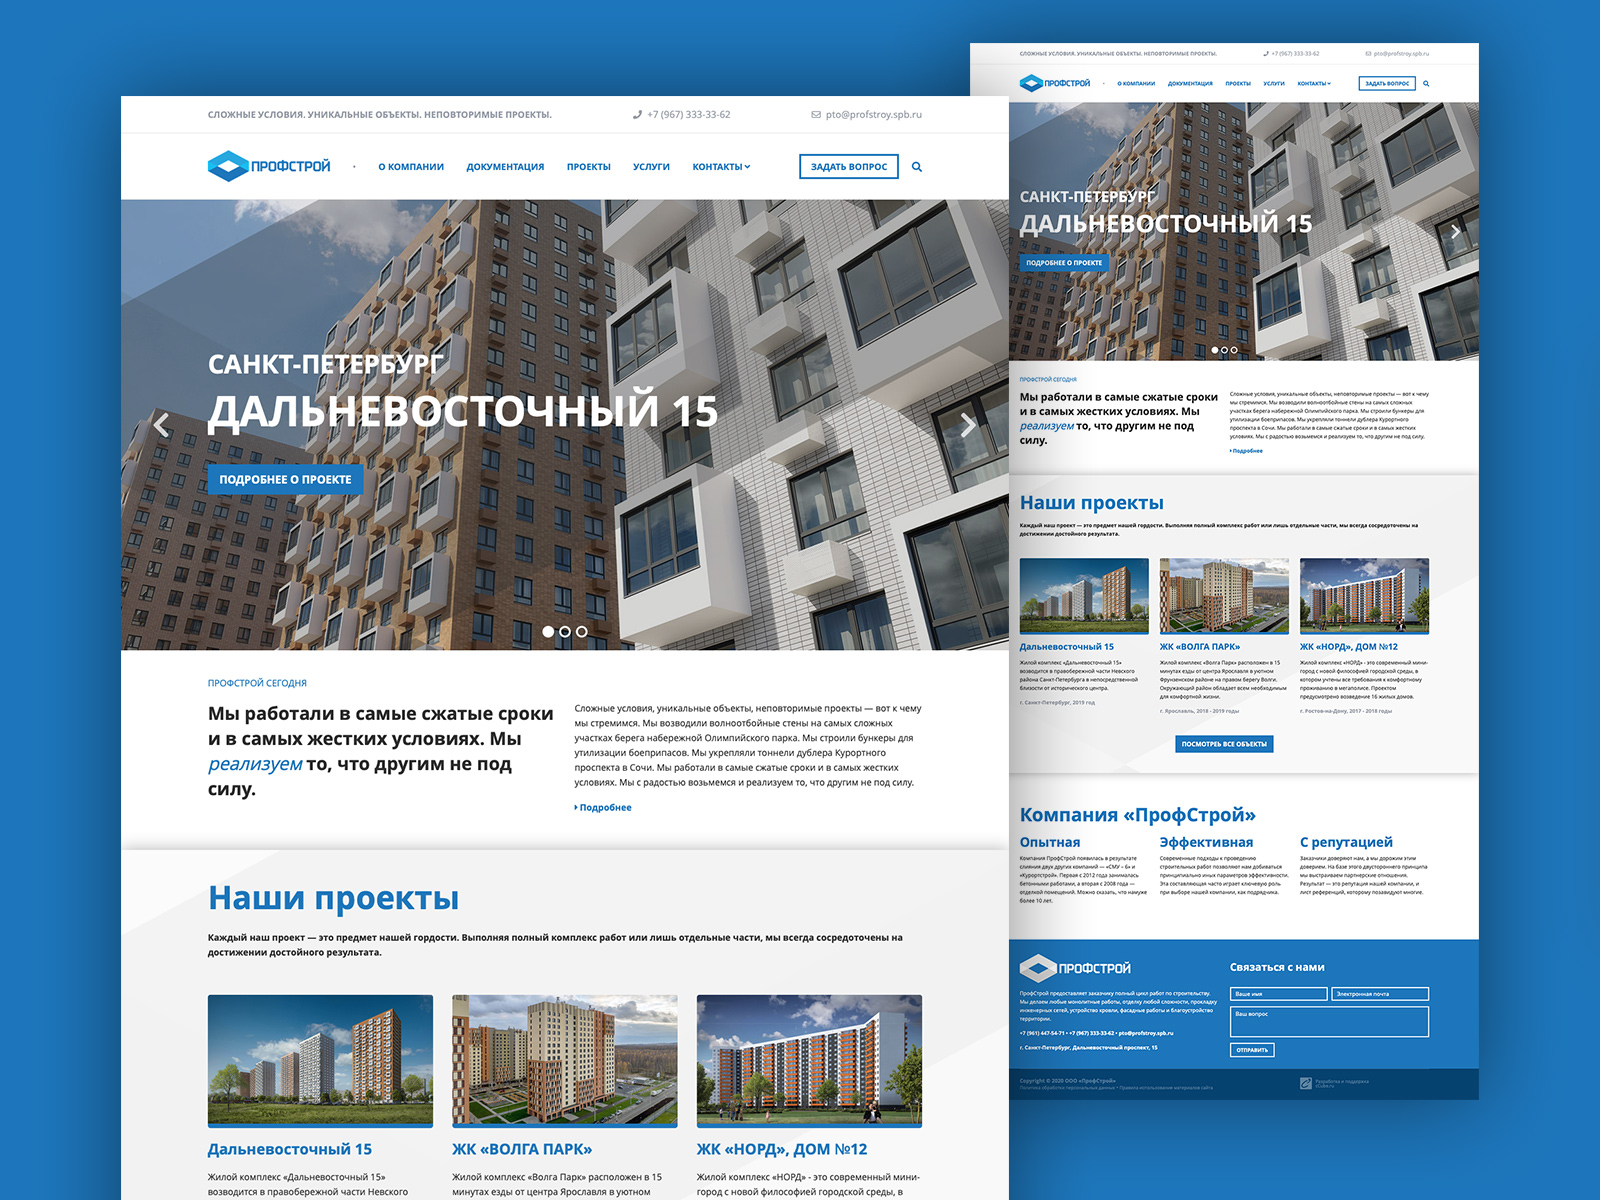 Corporate website of the Profstroy construction company with a catalog of completed objects